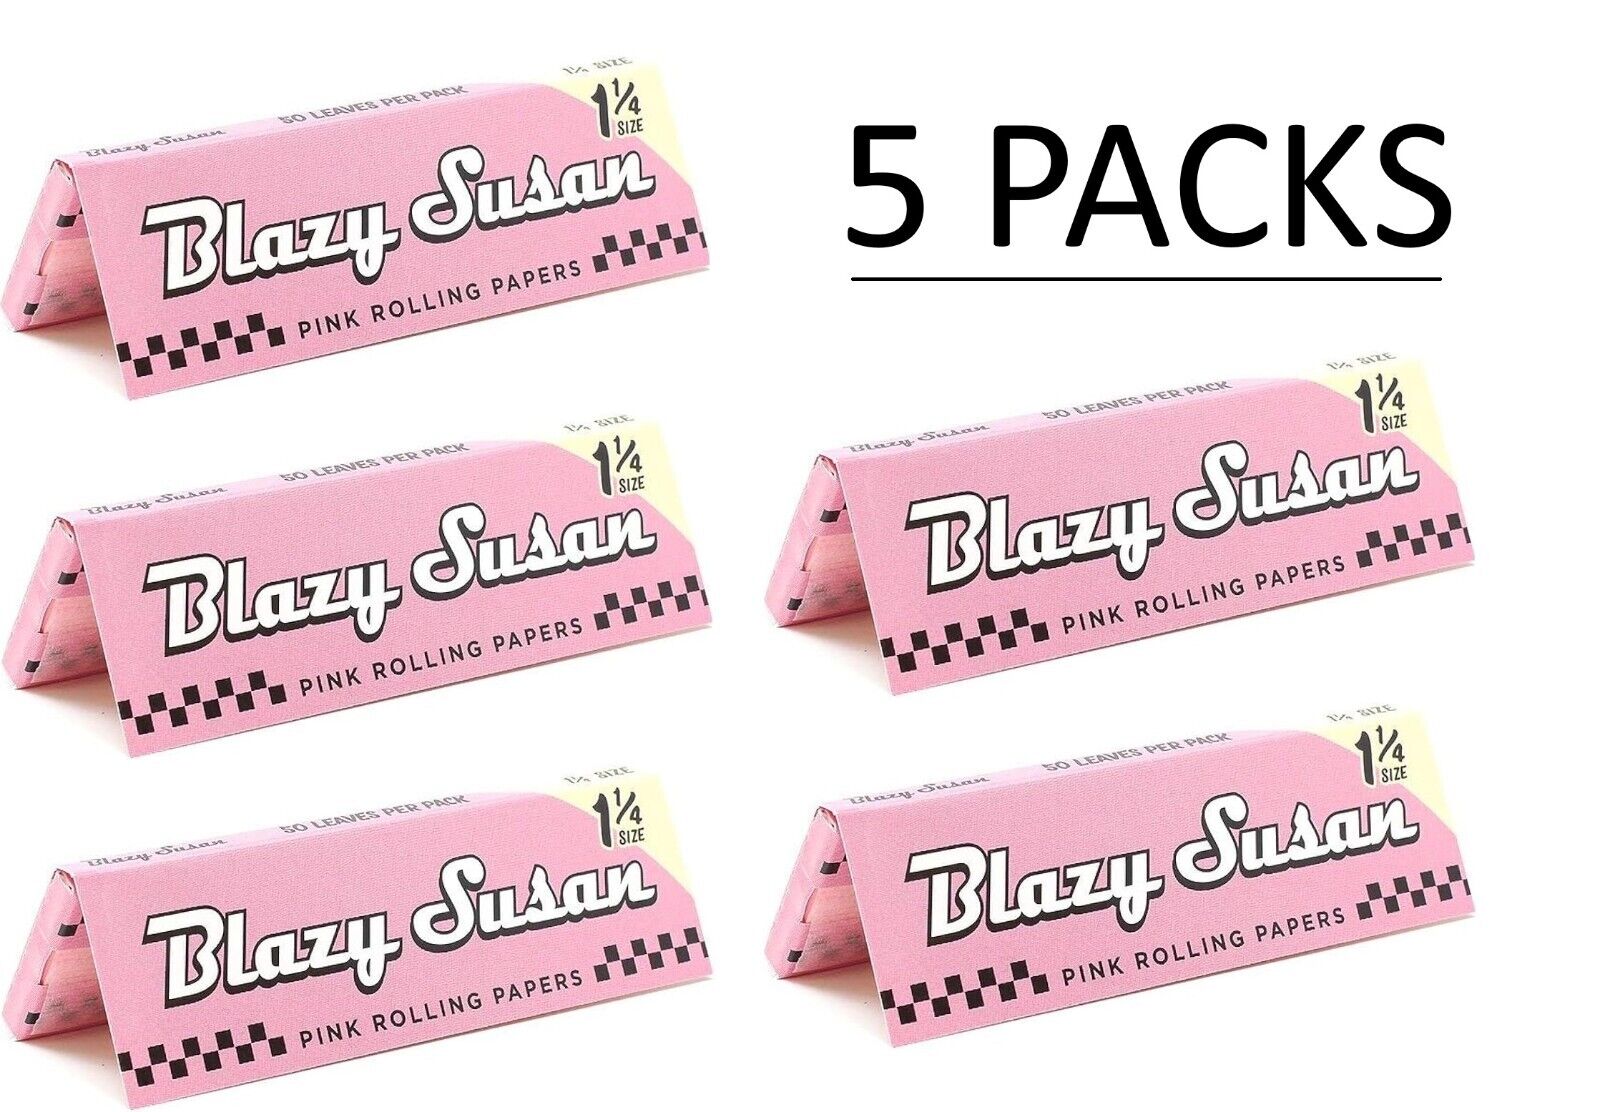 5x Blazy Susan Rolling Papers 1 1/4 Pink Papers 5 Pks *Free Shipping💃